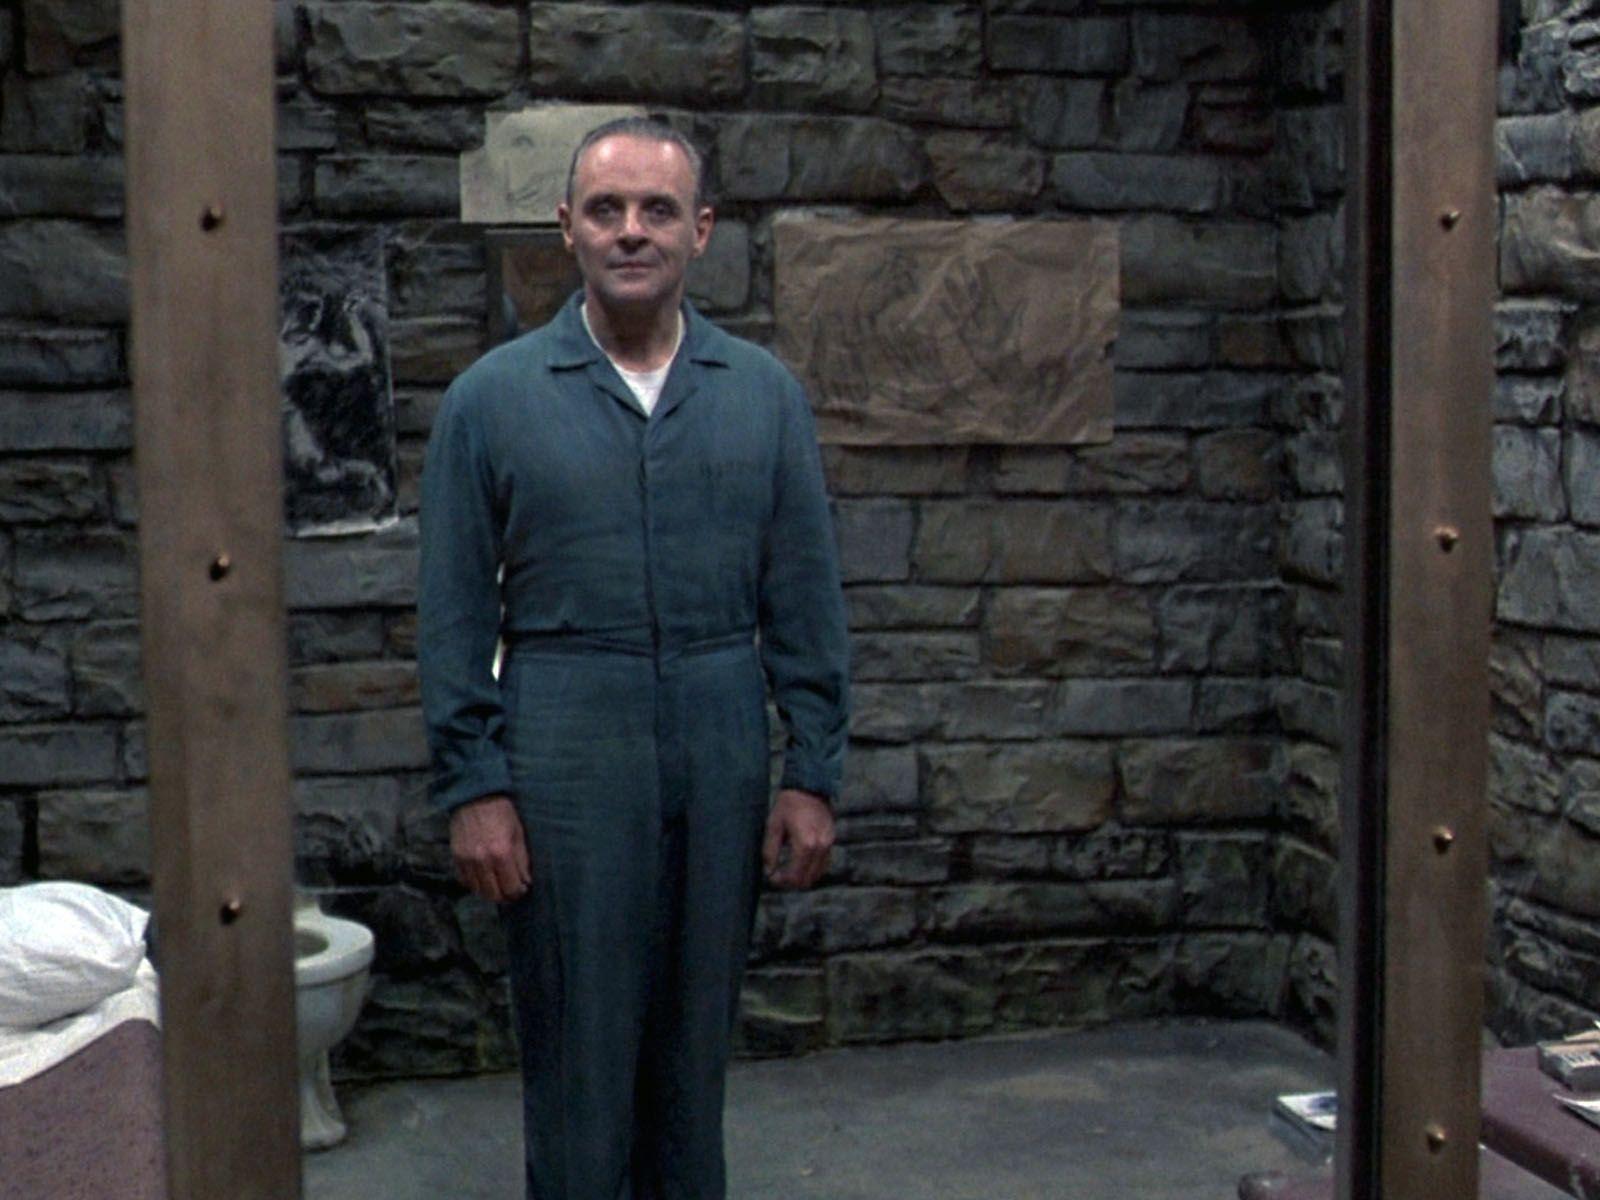 Silence Of The Lambs Wallpaper